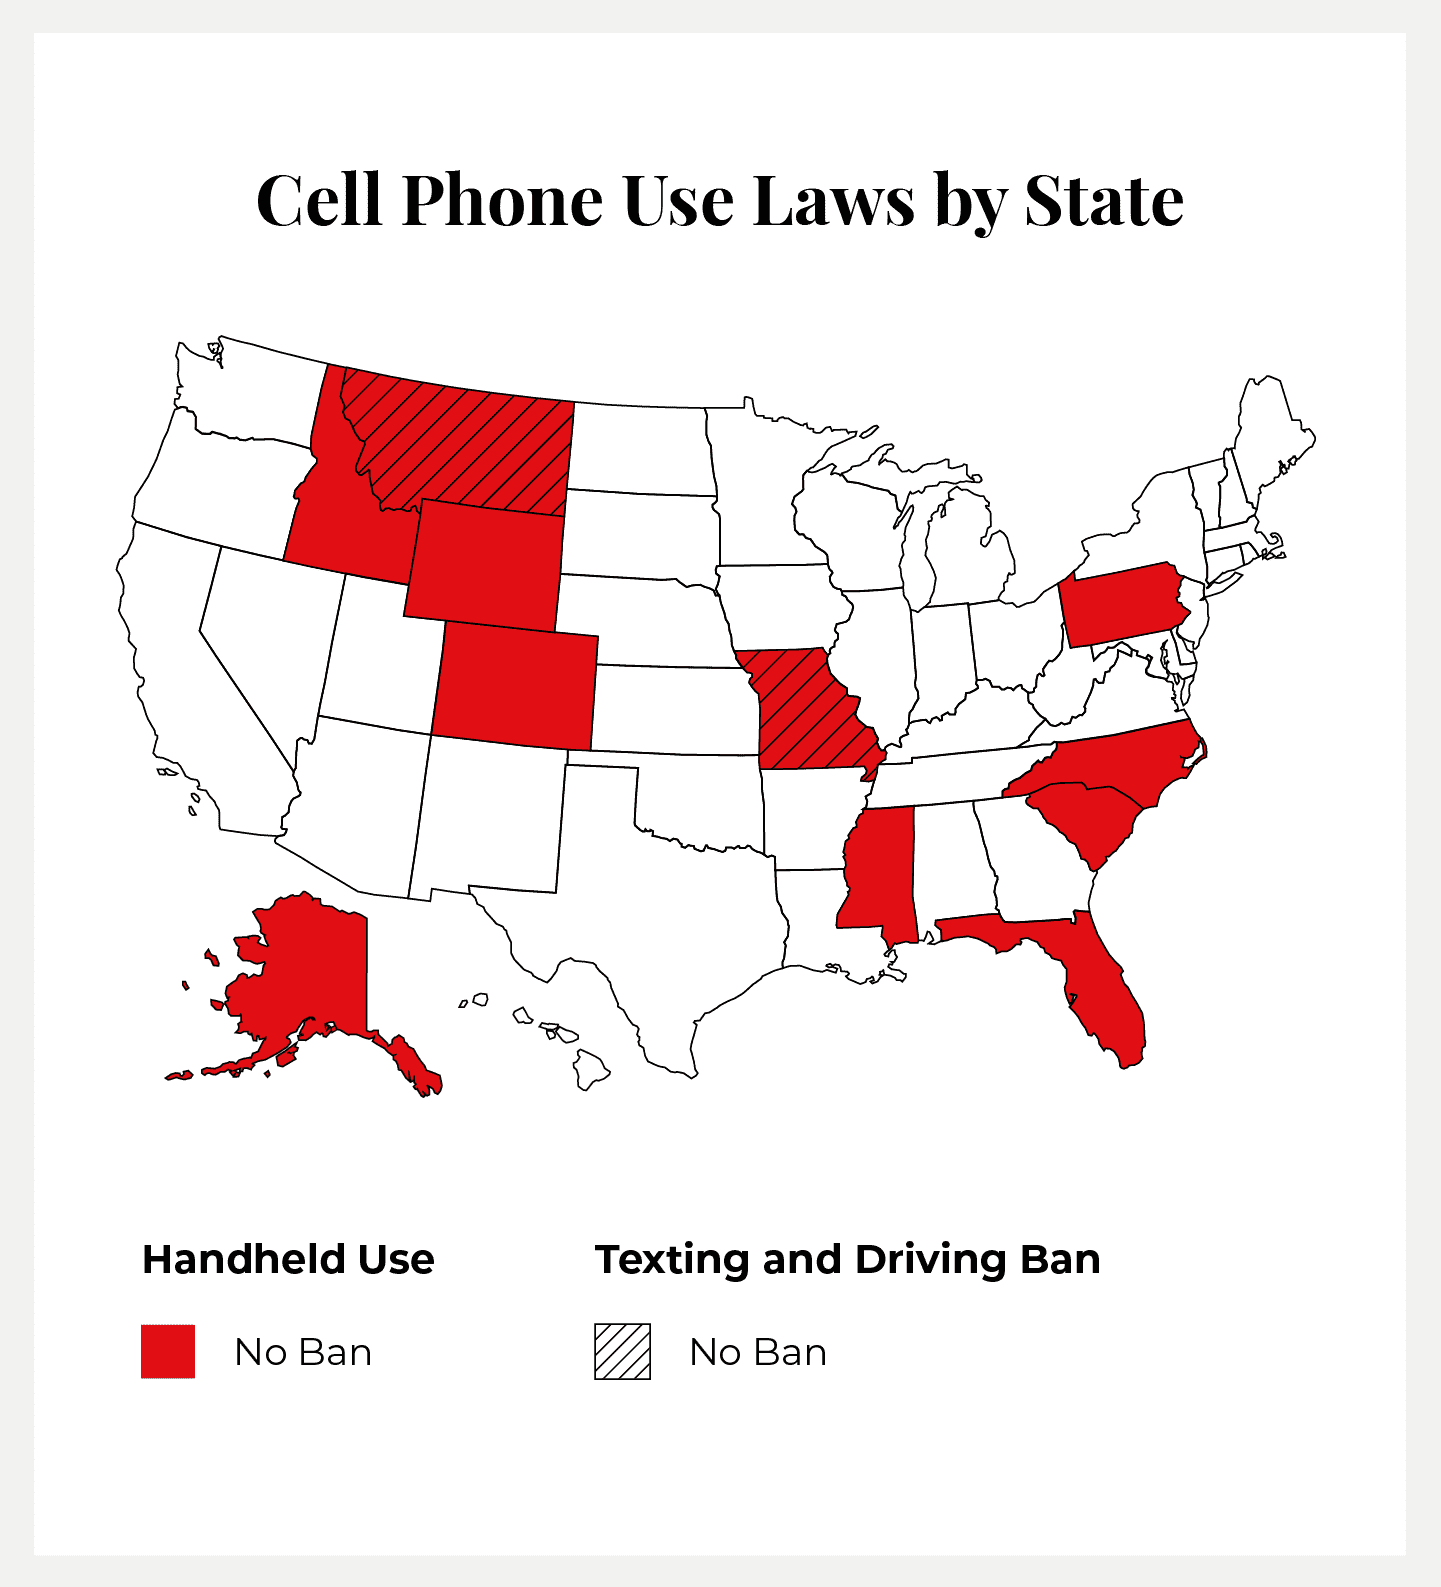 Map showing cell phone use laws by state